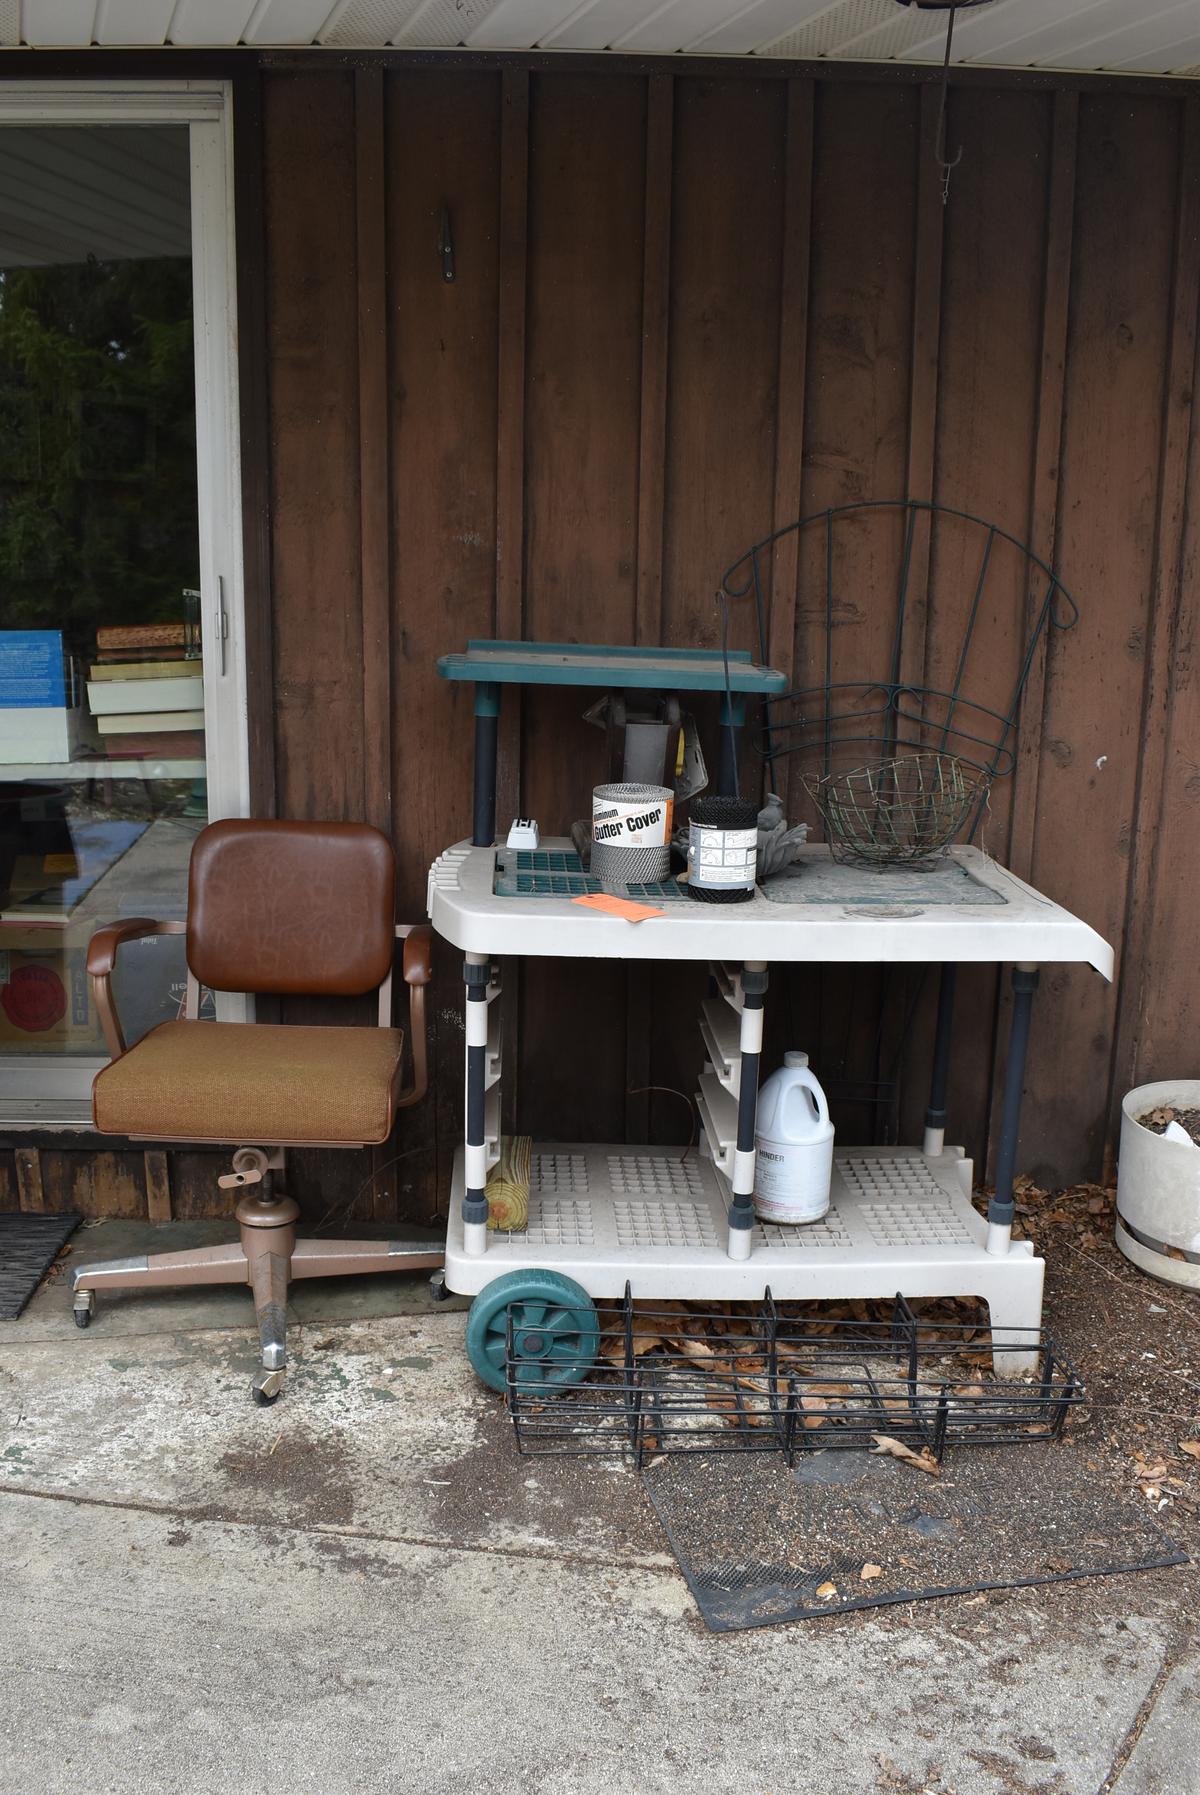 POTTING CART WITH CONTENTS; CARDINAL BIRD FEEDER, WIRE BASKETS, CUTTER COVERS, TRELLIS, ETC.